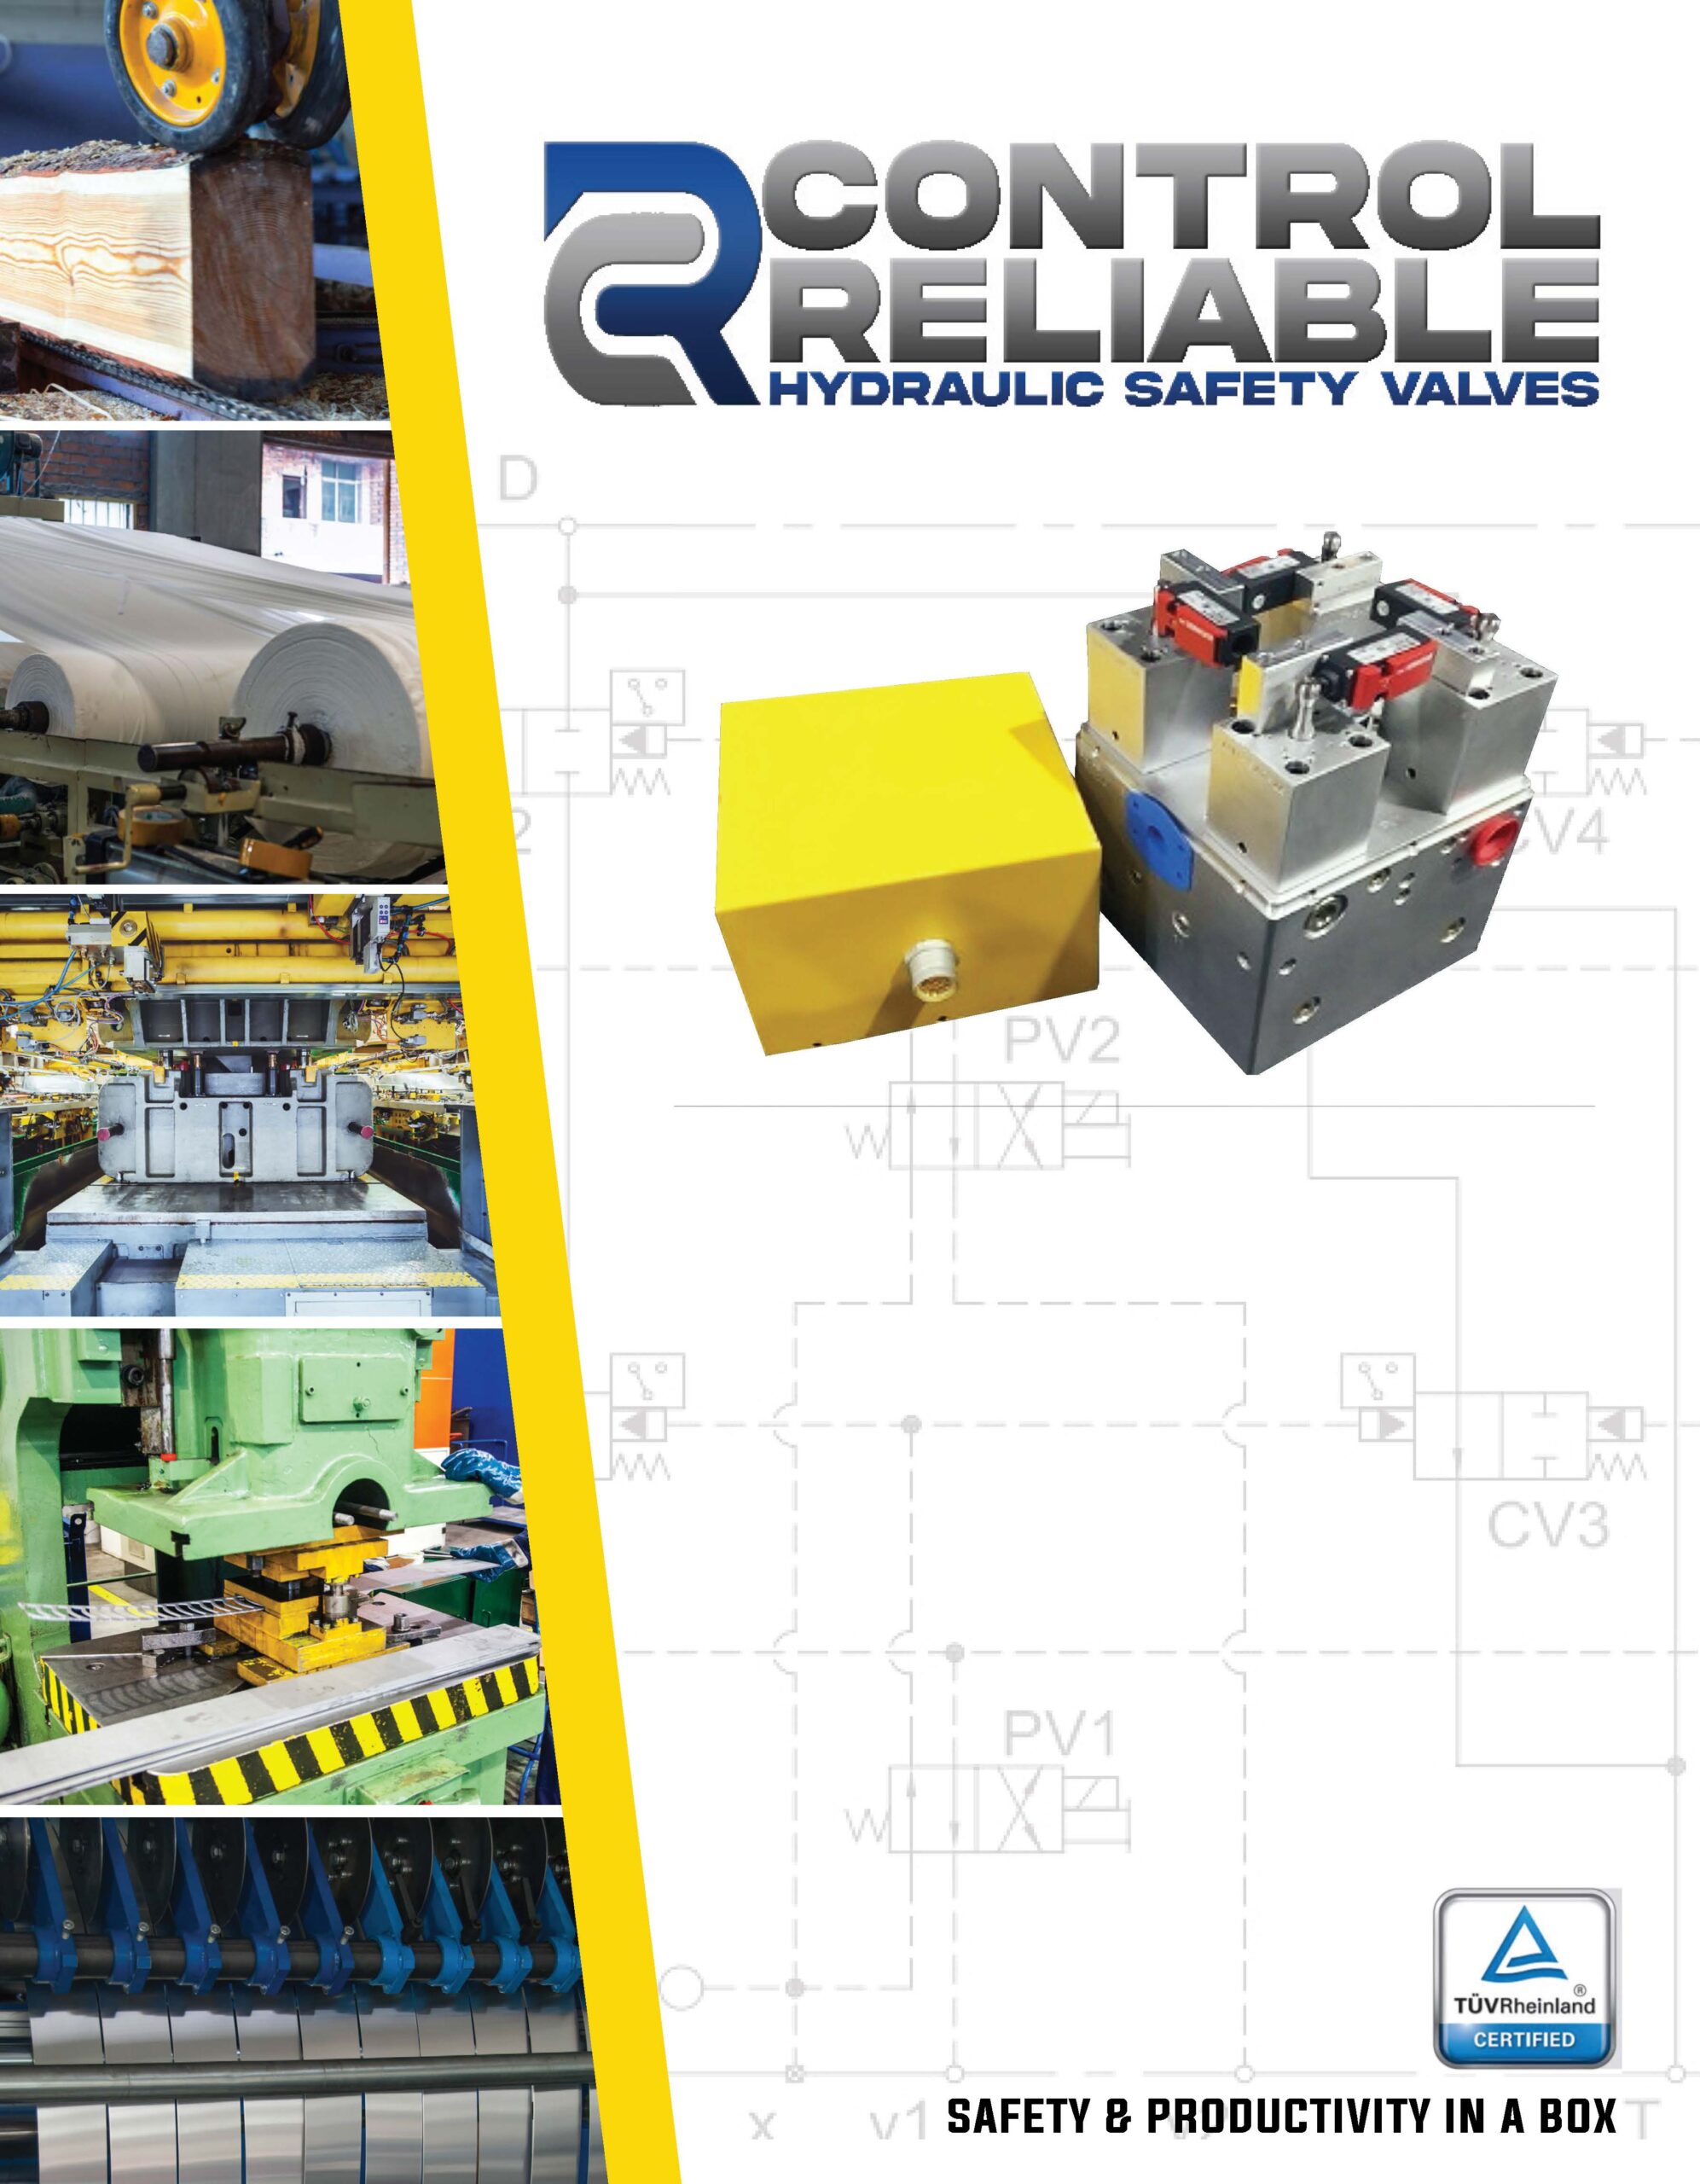 Control Reliable Hydraulic Safety Valves Brochure